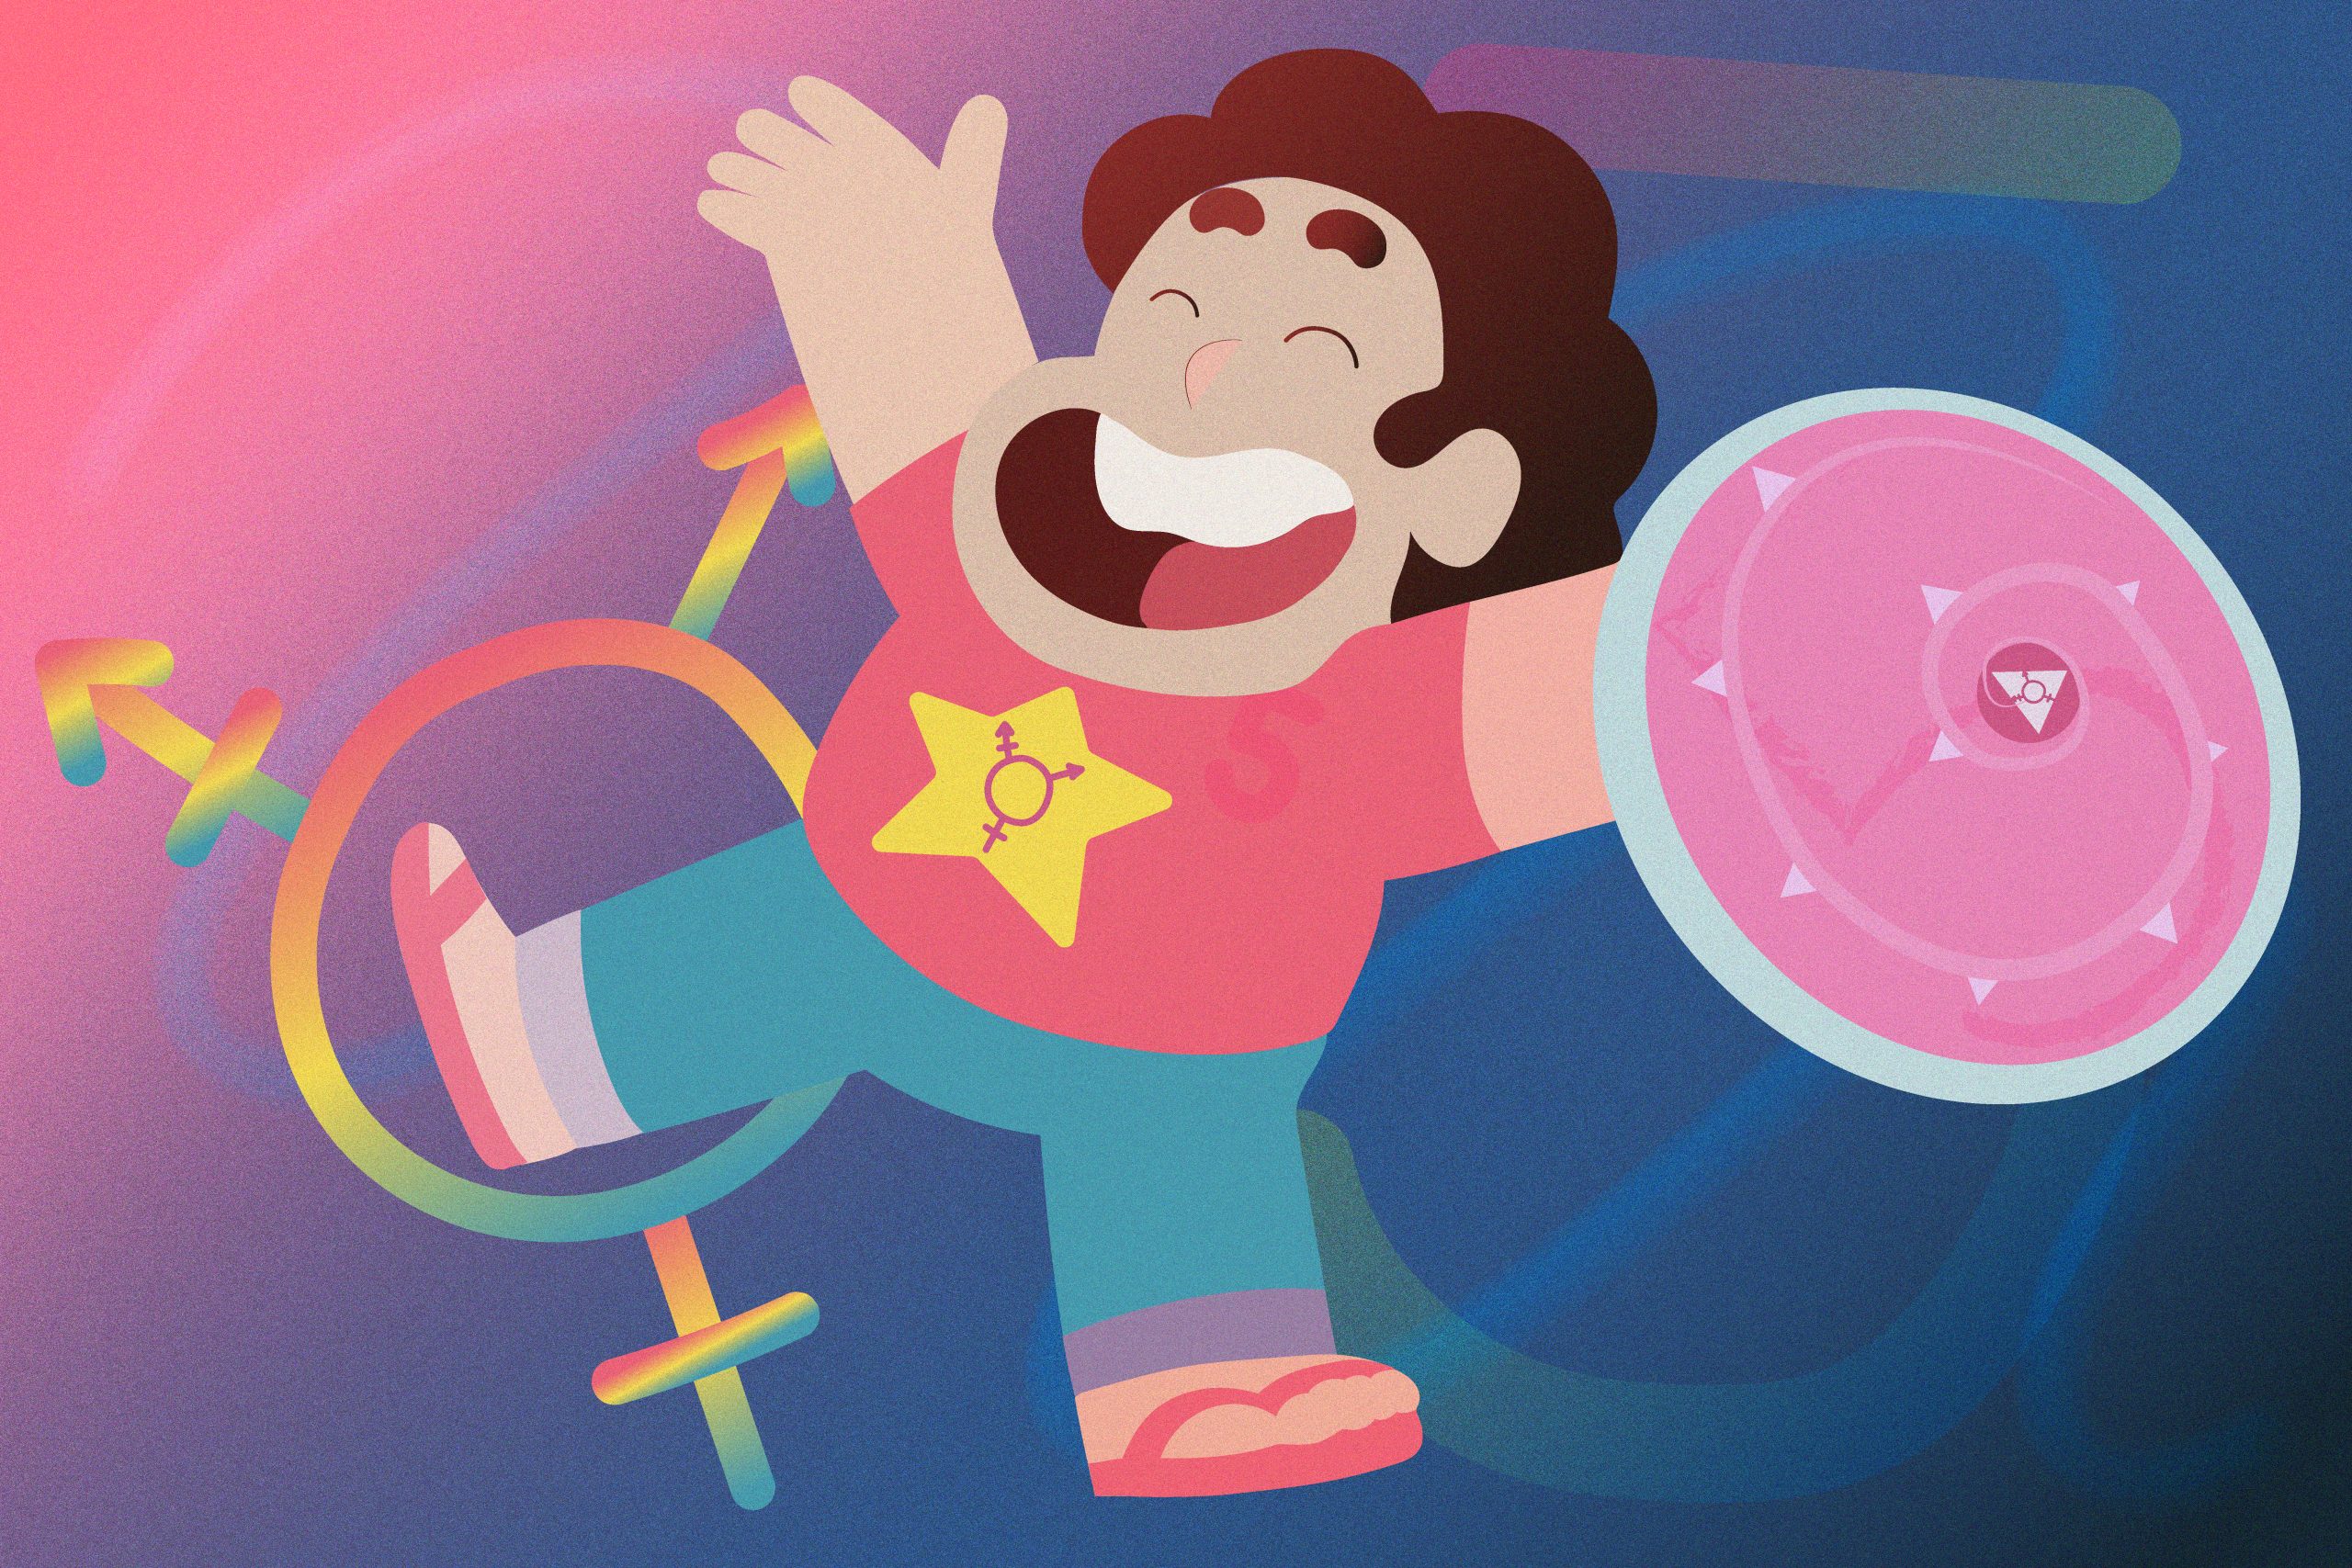 Steven Universe' and the Experiences of the Transgender Community